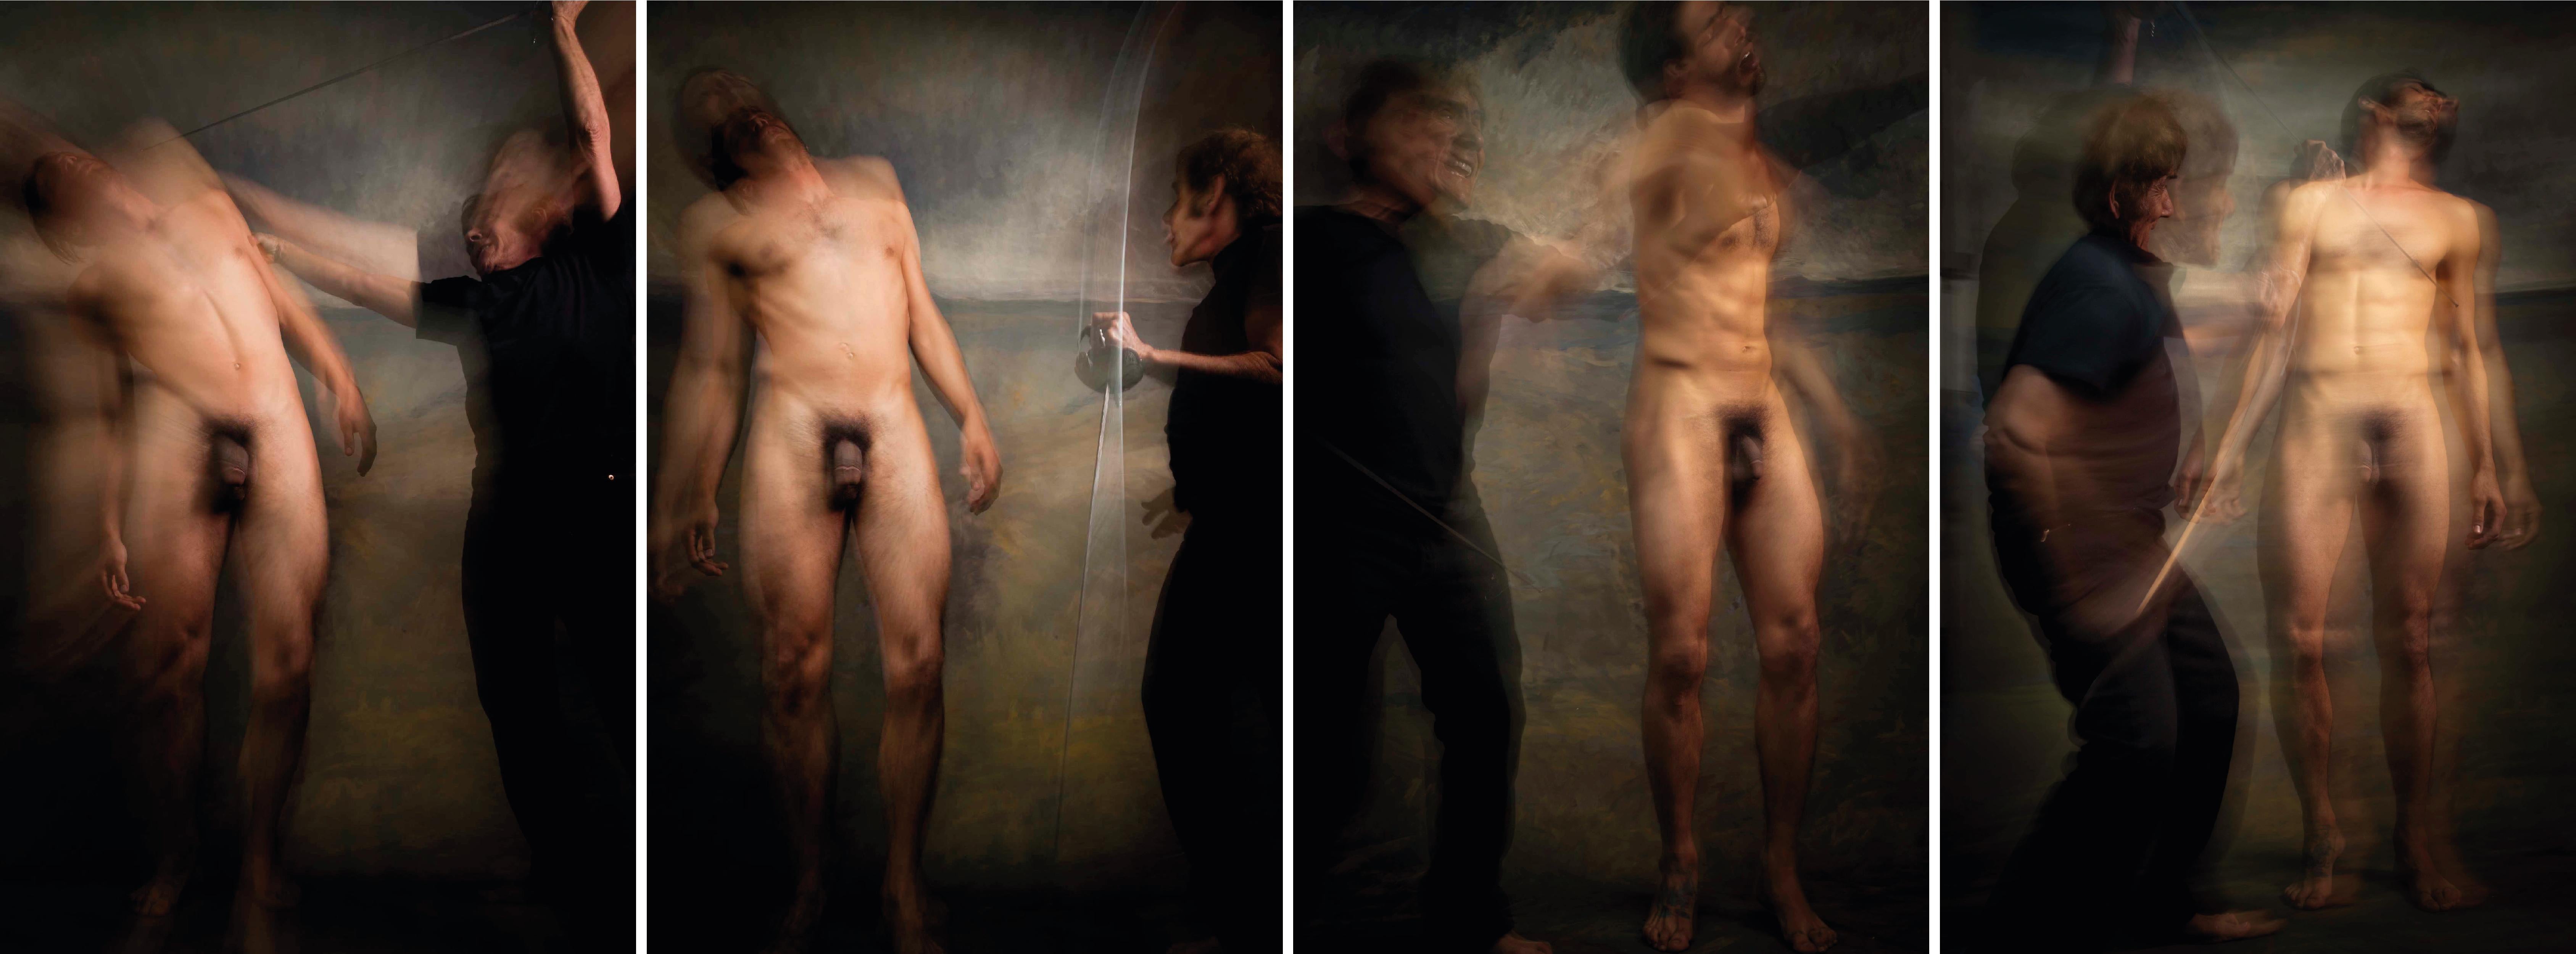 Mauricio Velez Nude Photograph - Untitled VI, VII, XI and IX. From the Half Angels Half Demons series. Male Nude 